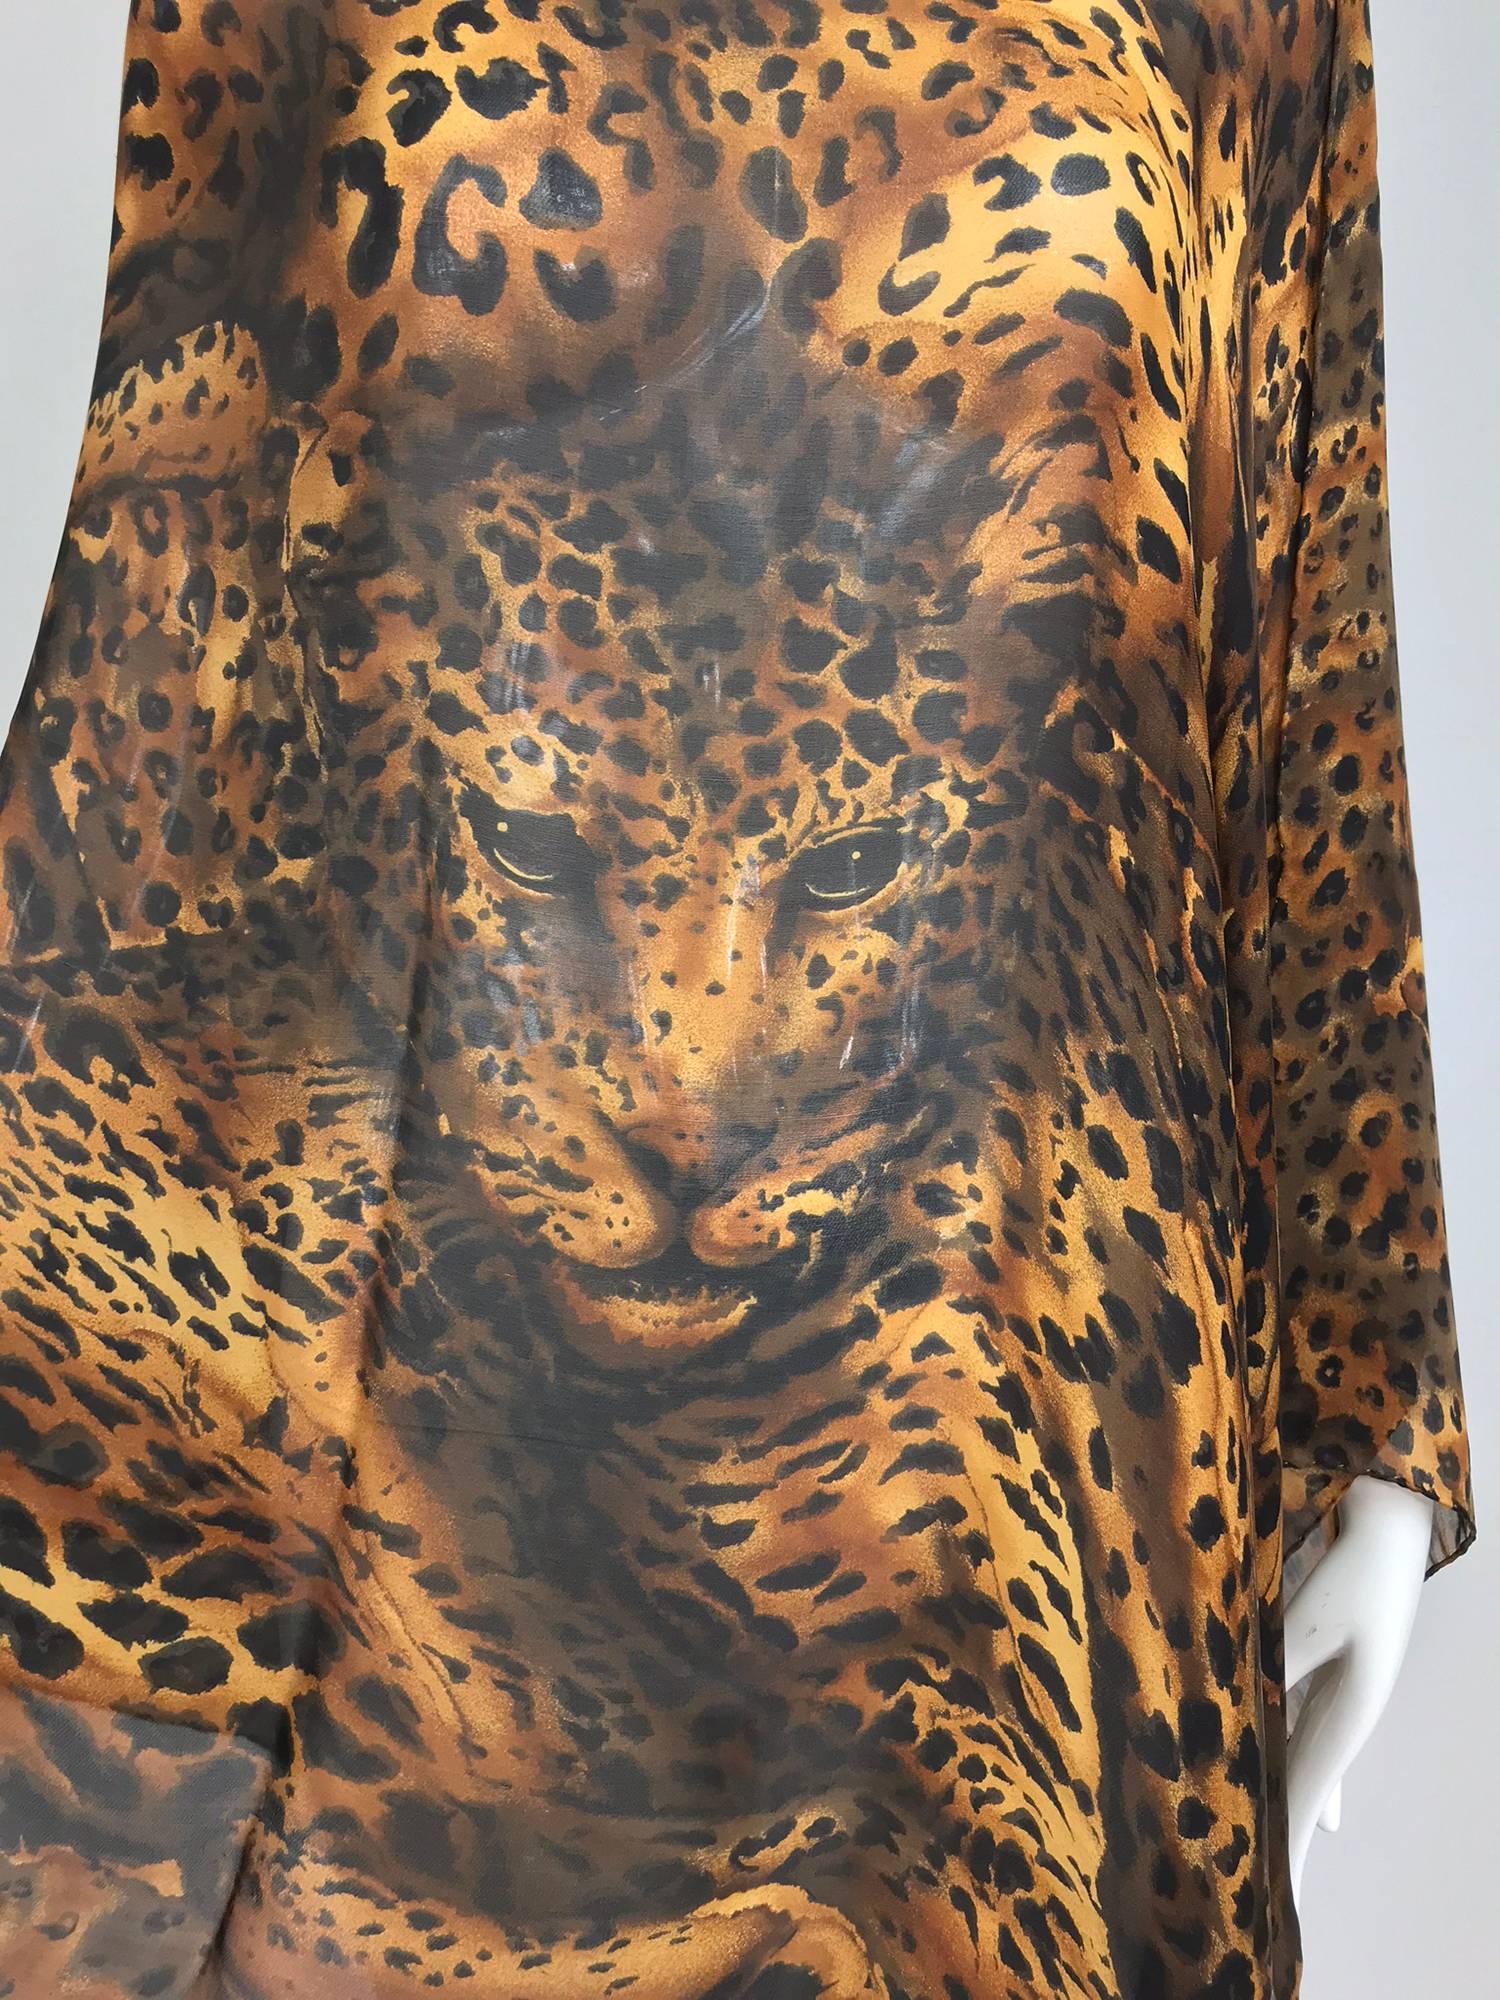 Yves Saint Laurent large leopard silk chiffon shawl or scarf...This large scarf can be used as a shawl or wrap...Beautiful full body leopard printed across the scarf...Silk chiffon, looks barely, if ever worn...Approximately 34 1/2